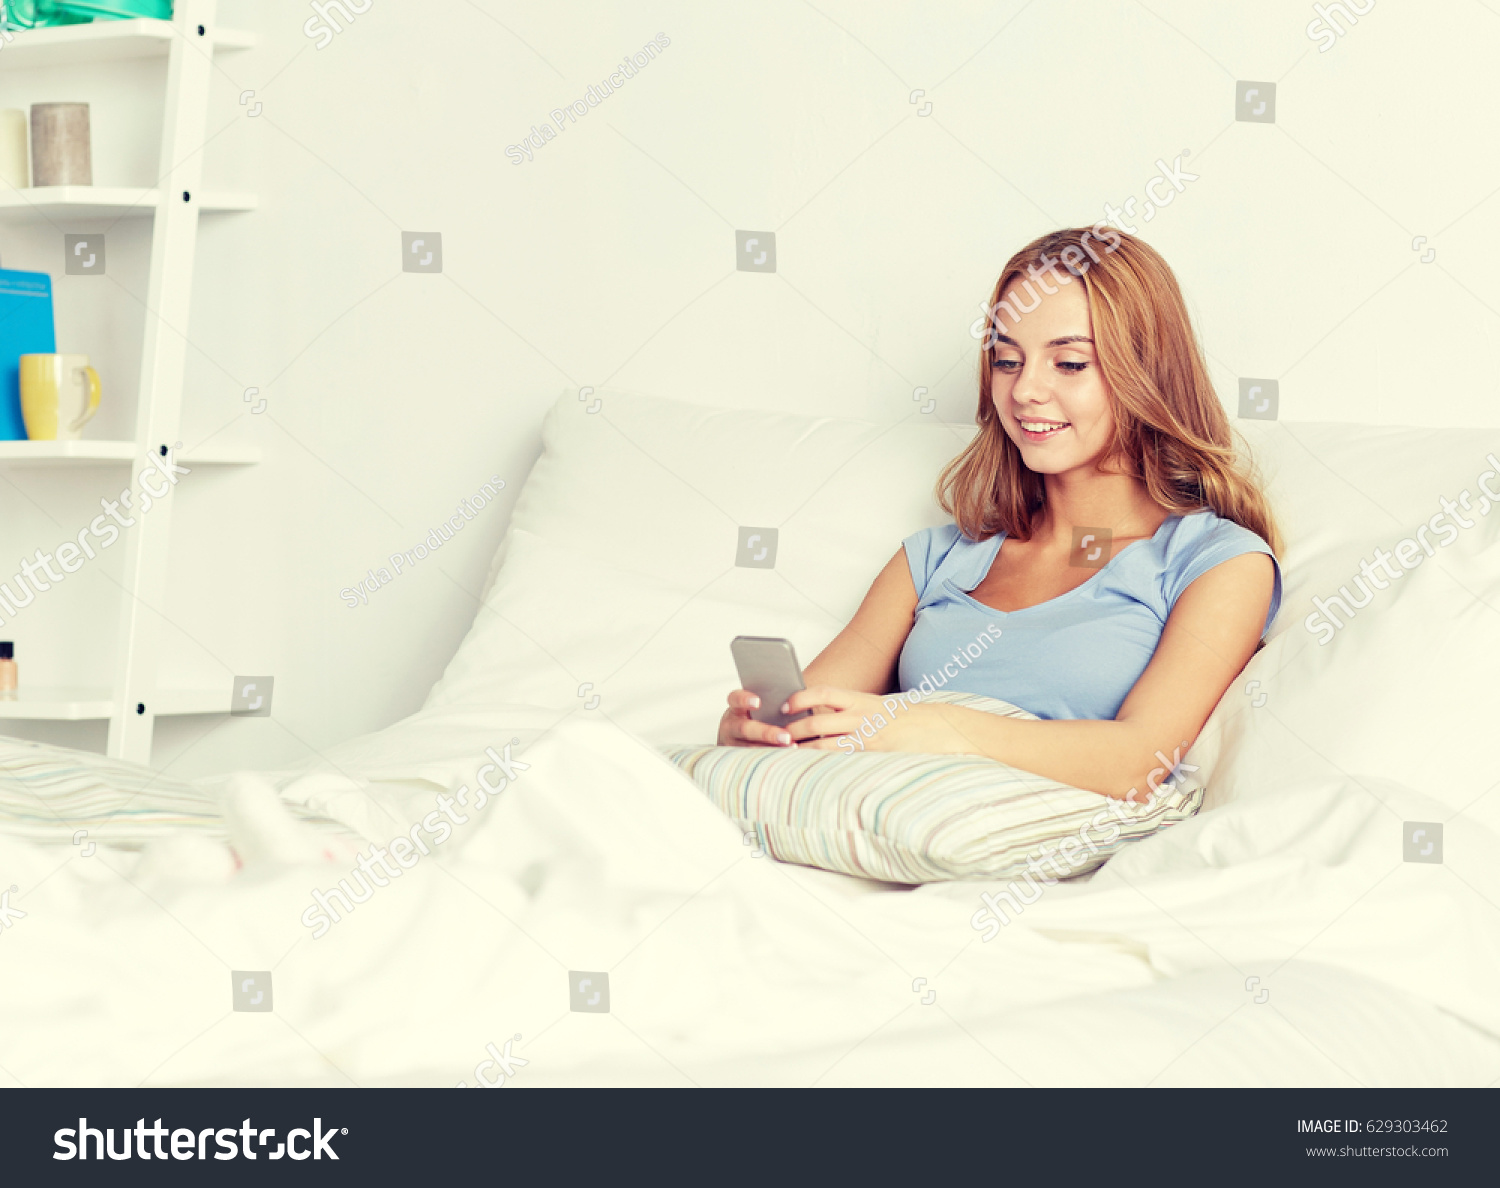 people, leisure and technology concept - happy woman or teenage girl with smartphone in bed at home #629303462